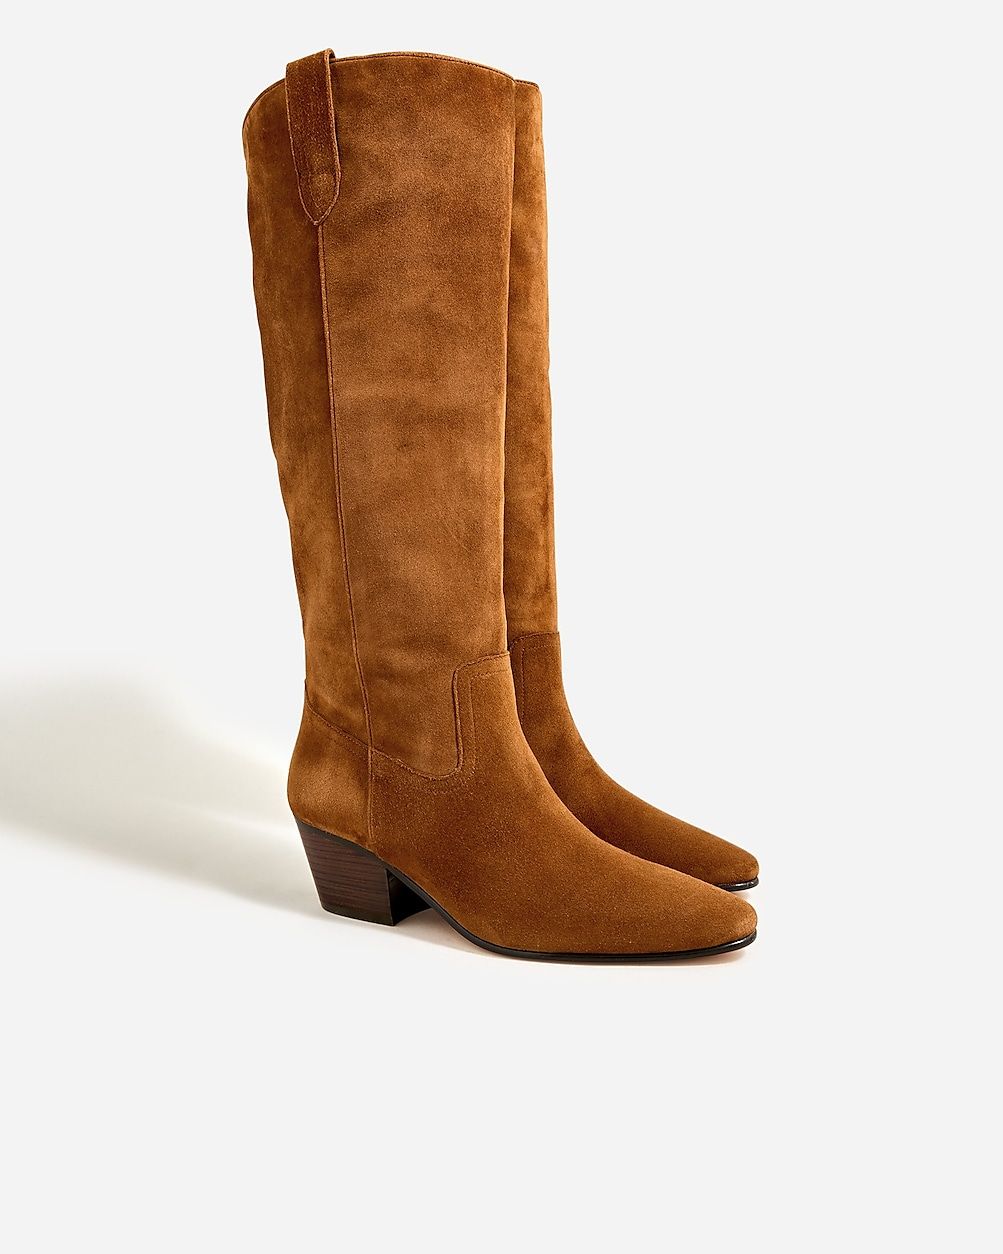 Piper knee-high boots in suede | J.Crew US